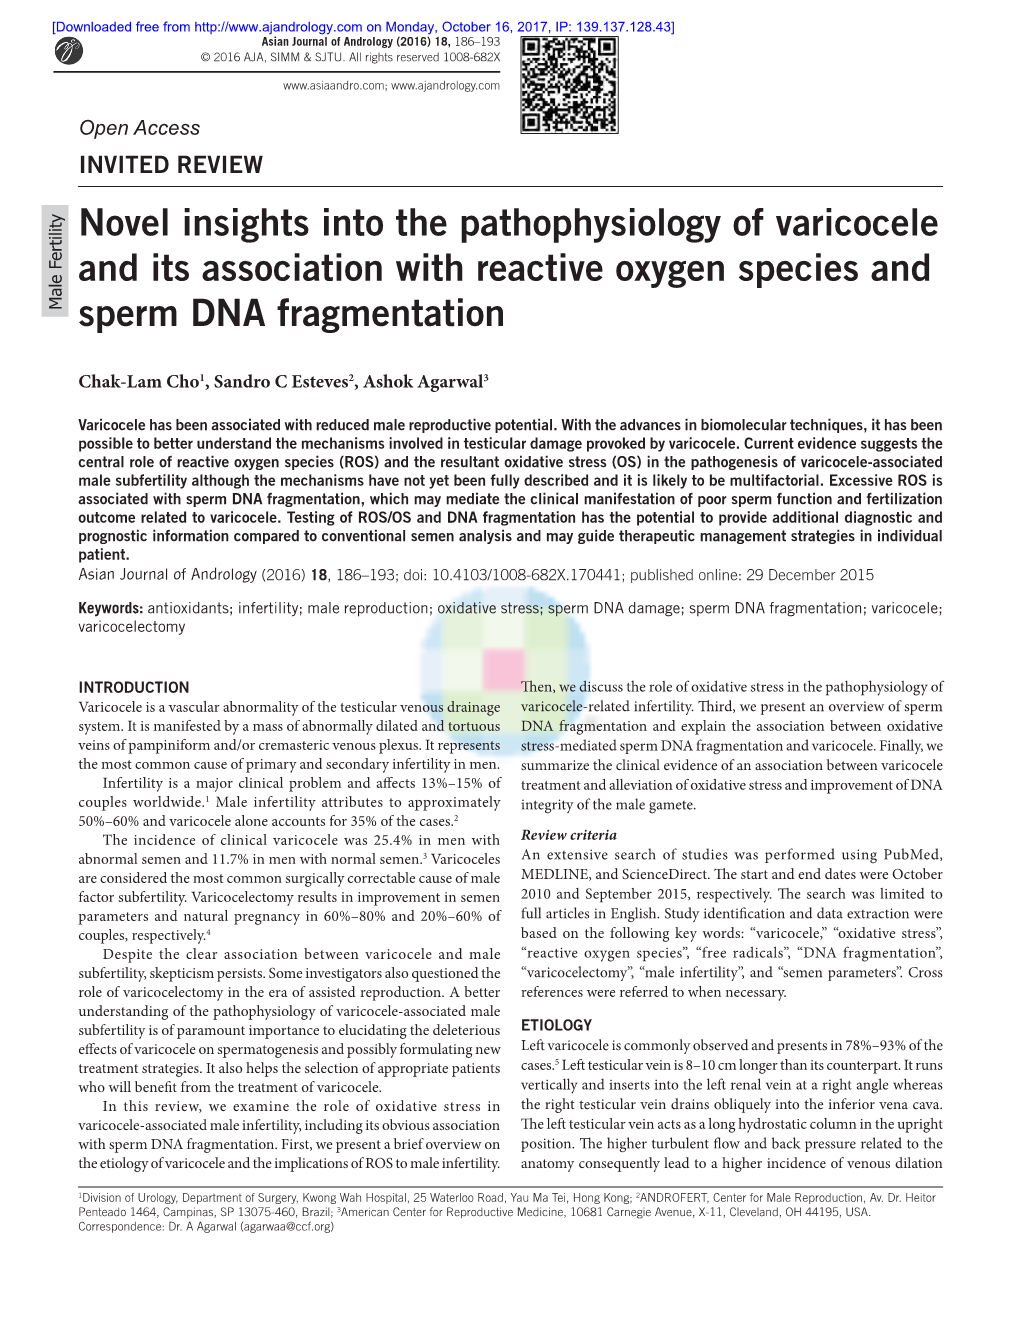 Novel Insights Into the Pathophysiology of Varicocele and Its Association with Reactive Oxygen Species and Male Fertility Sperm DNA Fragmentation